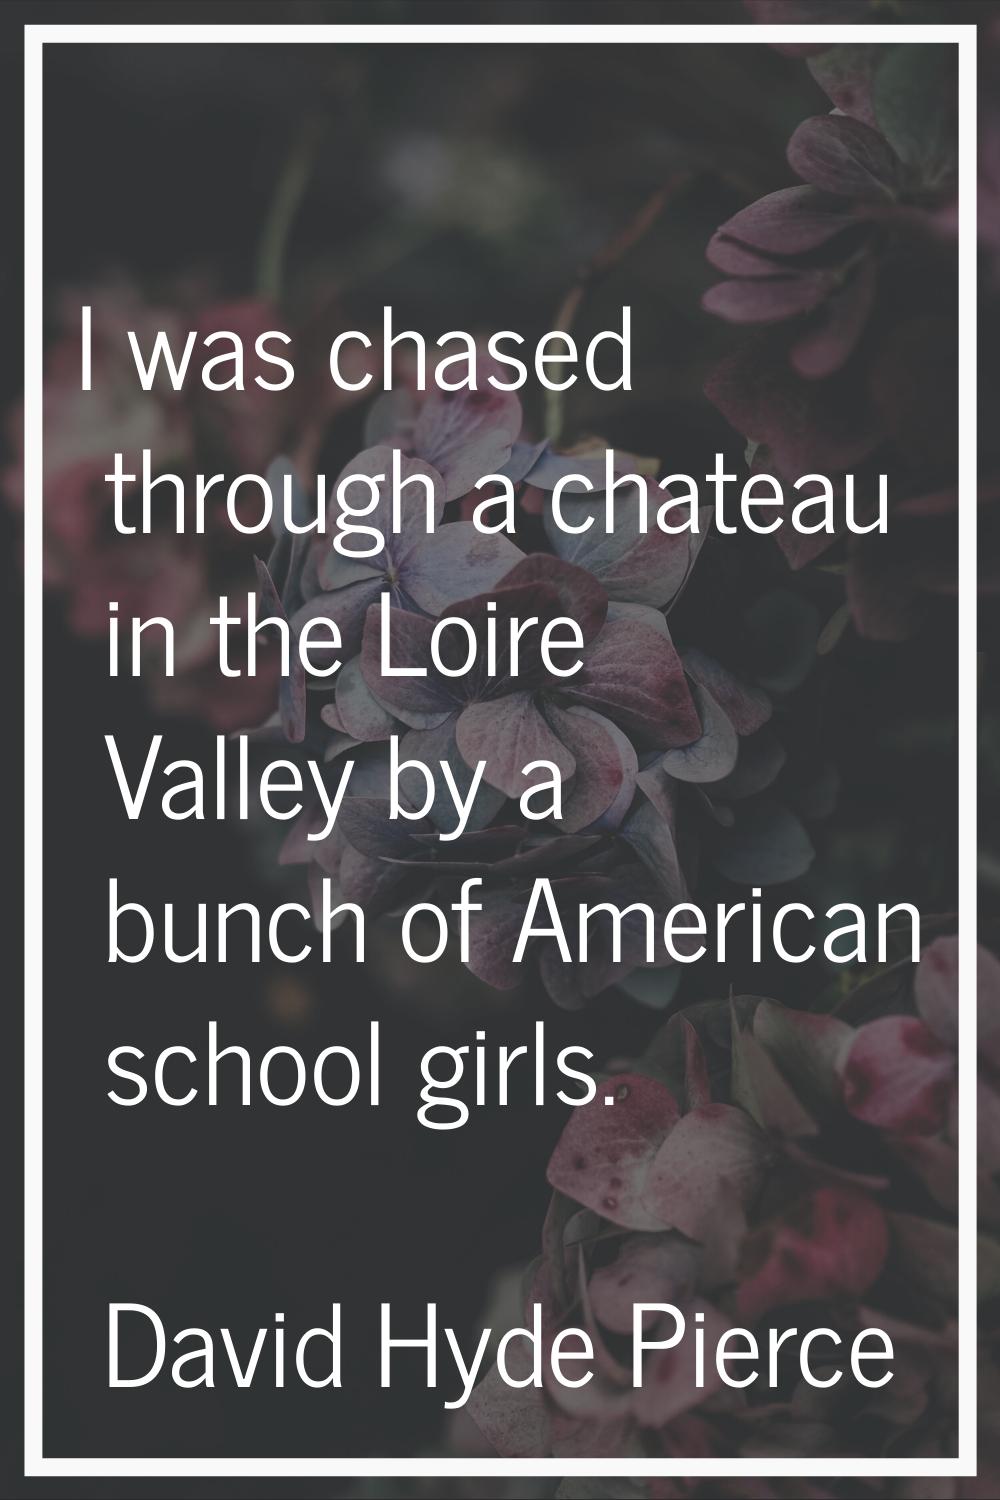 I was chased through a chateau in the Loire Valley by a bunch of American school girls.